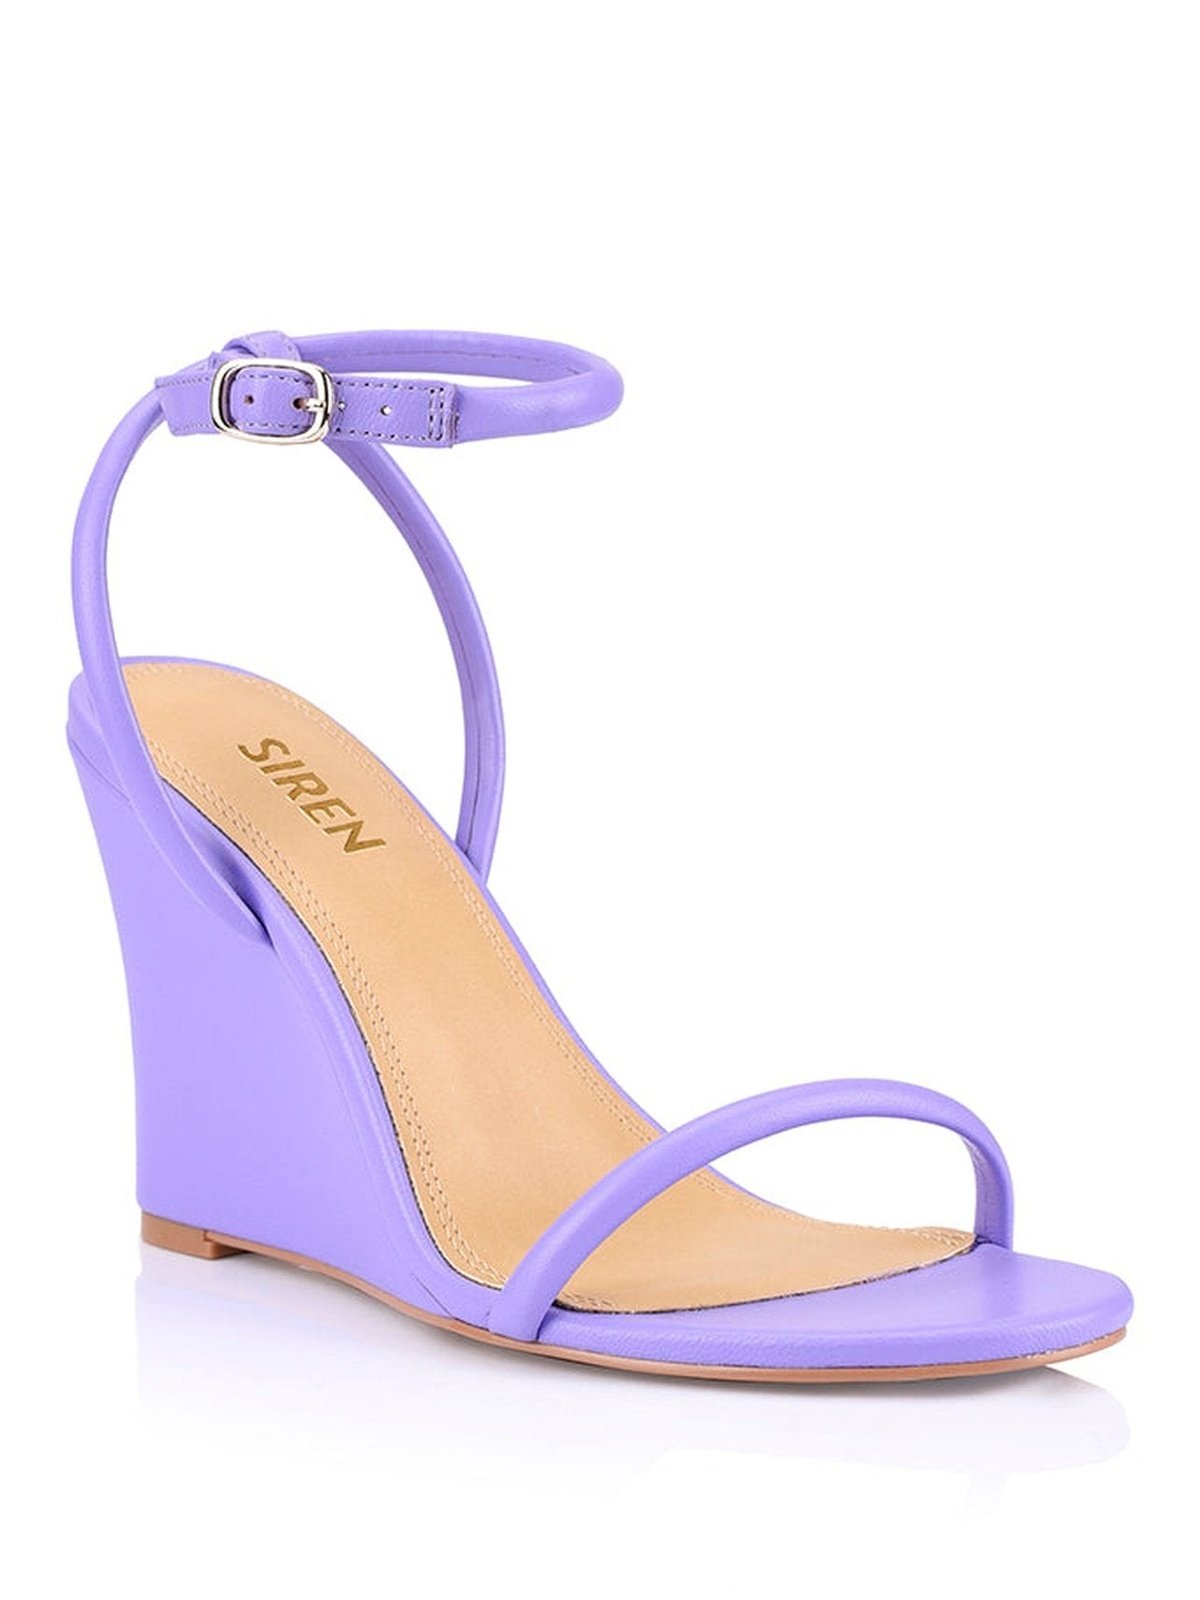 Bebe Wedge Sandals - Lilac Leather